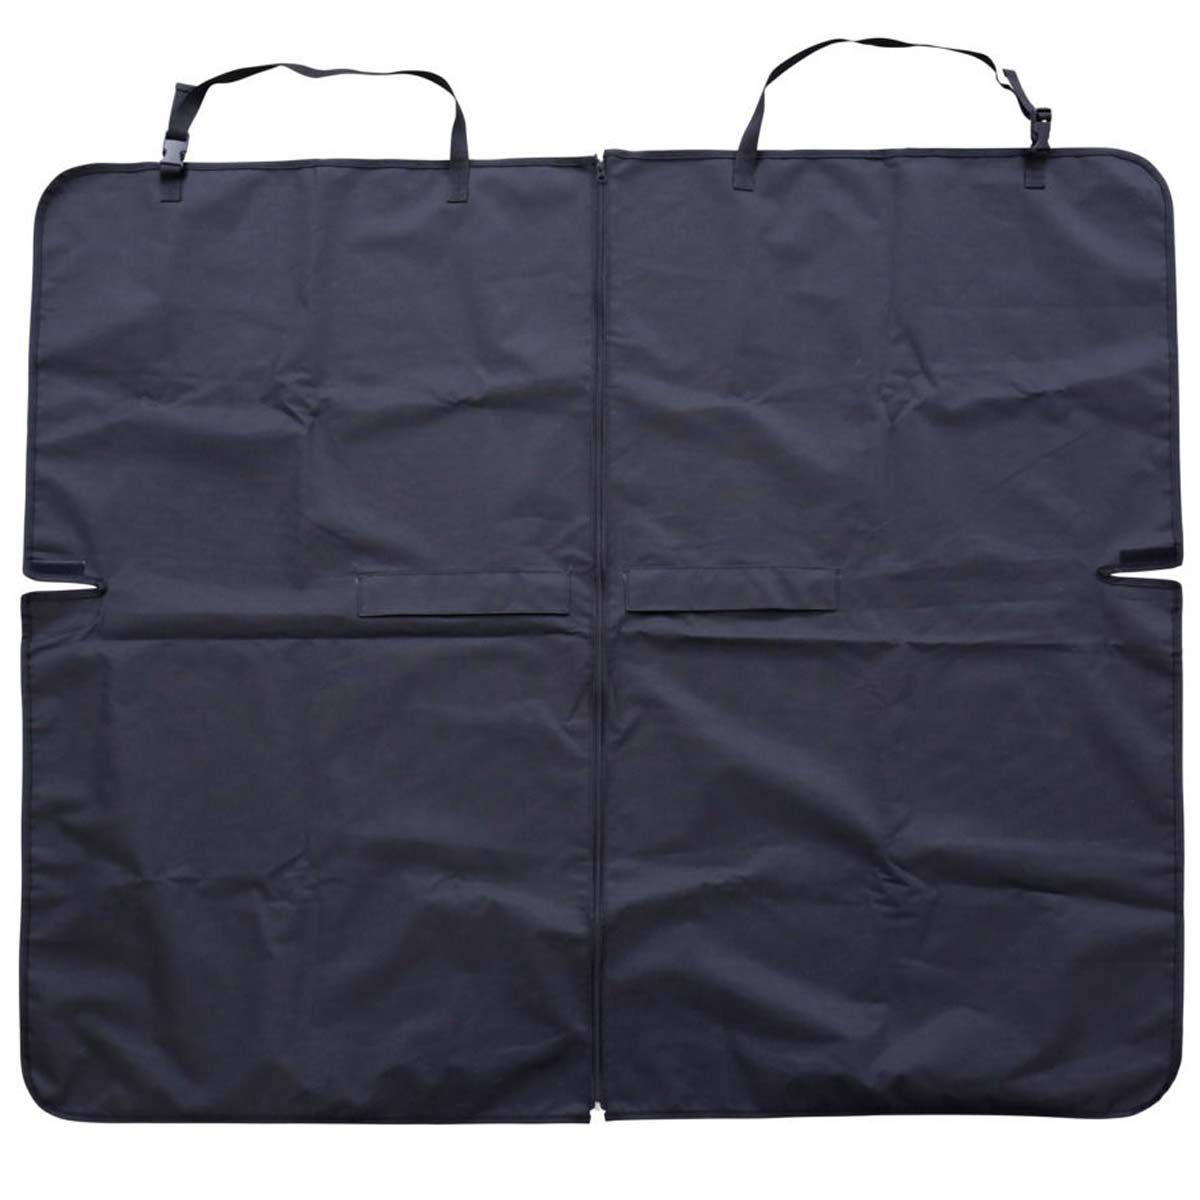 Kerbl Car cover for dogs